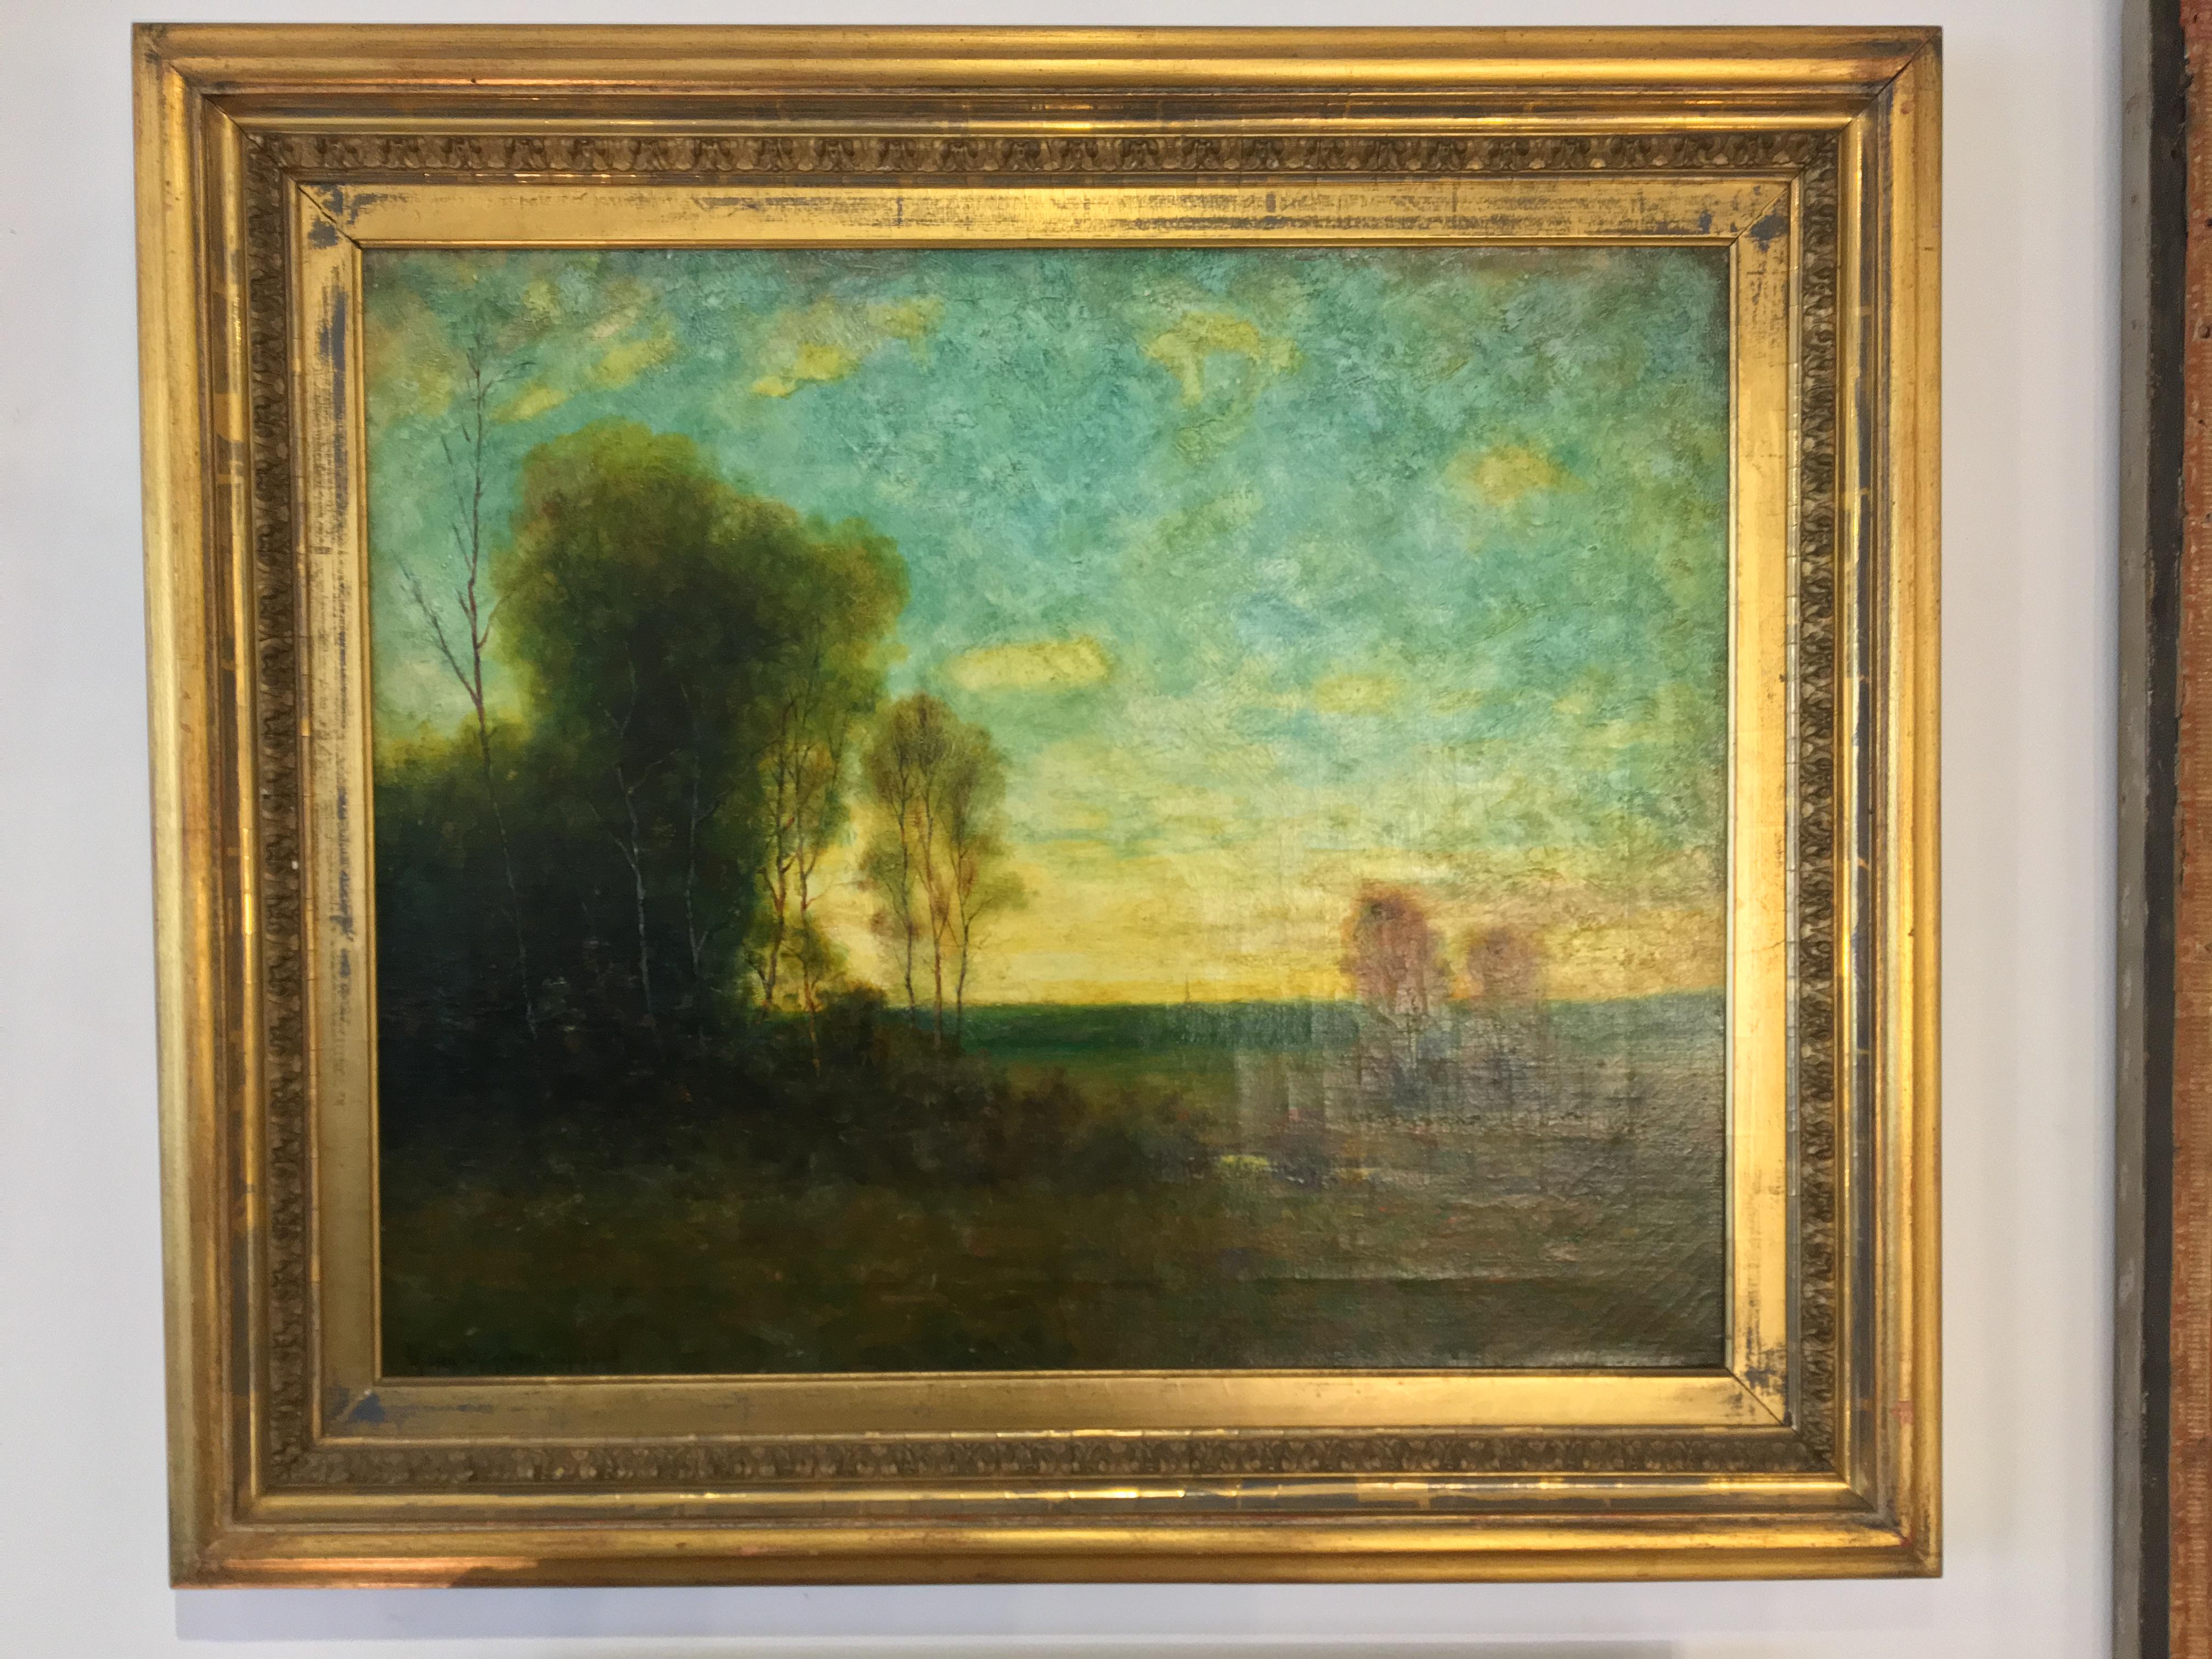 Stunning Walter Whitcomb Thompson oil on canvas of landscape. Titled ‘Evening Solitude.’ Signed in lower left corner. Likely a North Carolina location, possibly Beaufort. Canvas is set in gold tone wood frame. Some surface wear of frame. Verso has